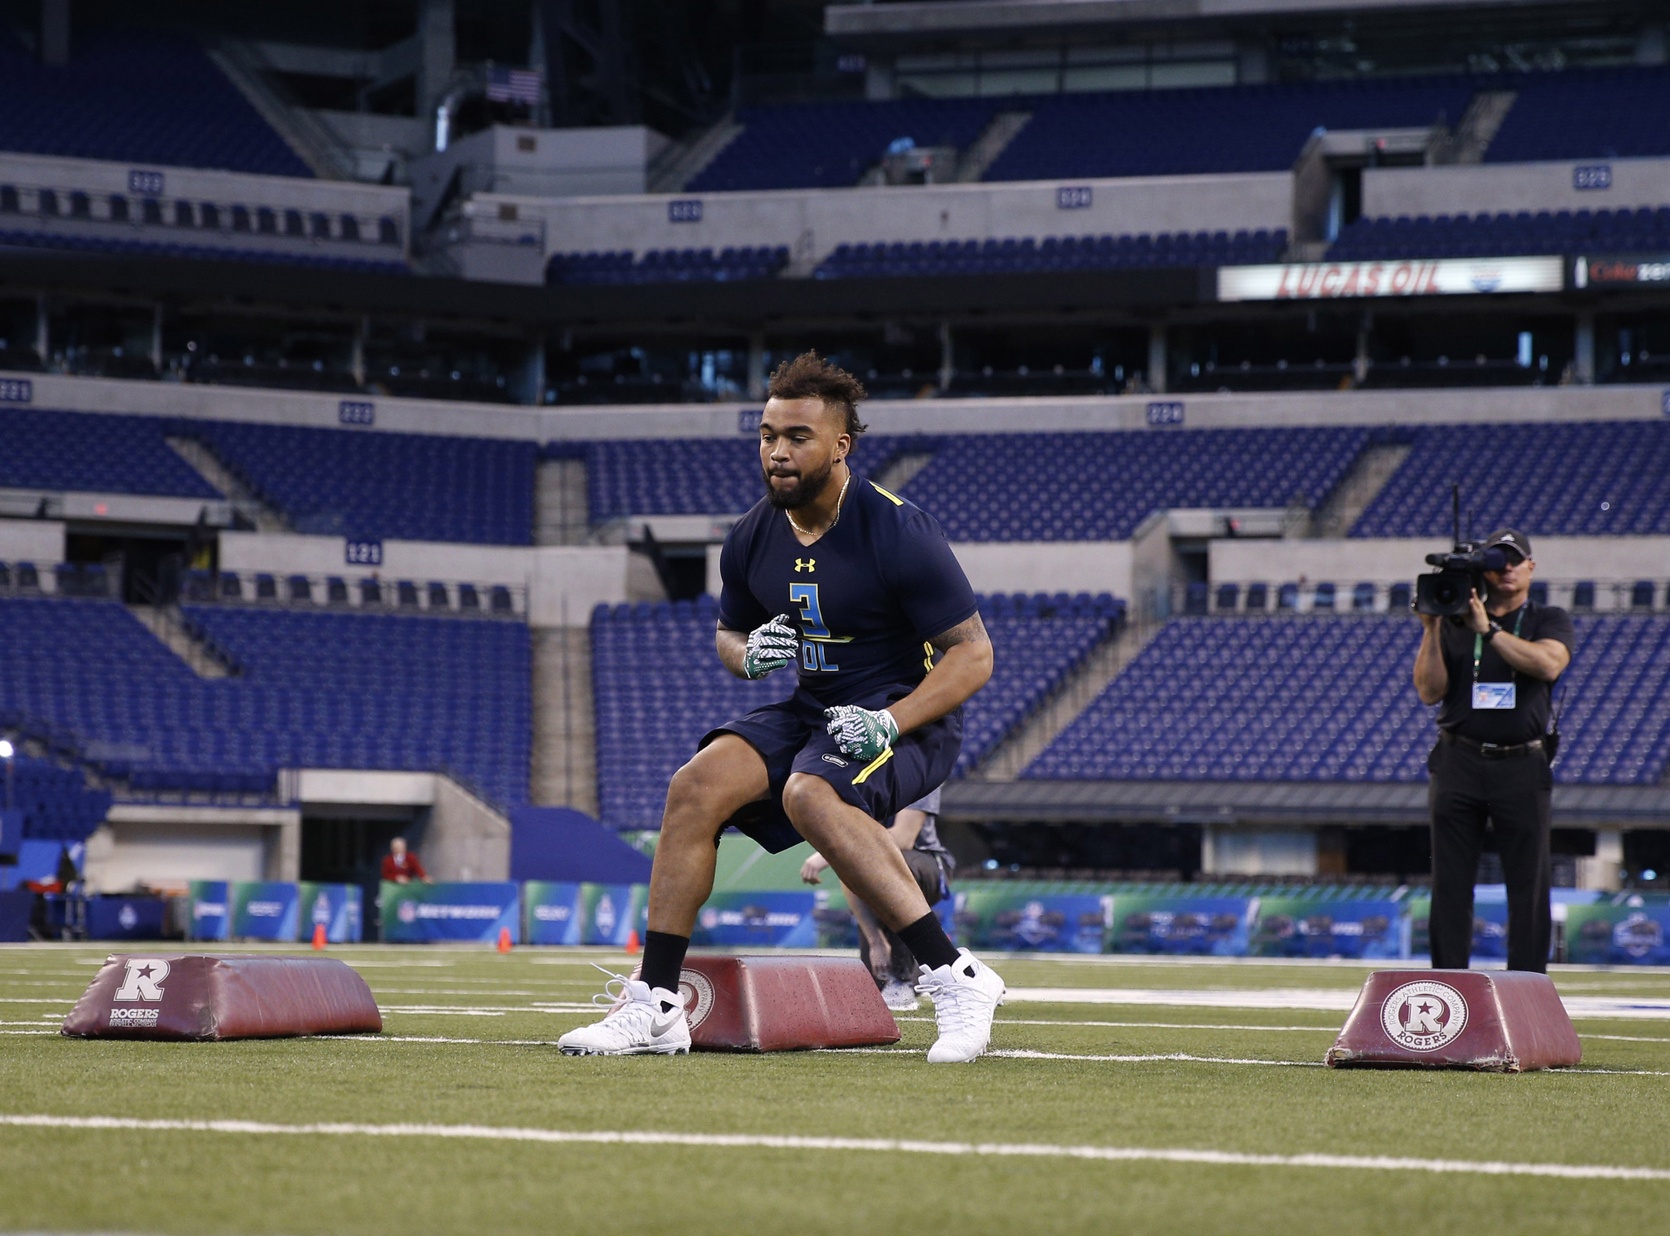 Mar 5, 2017; Indianapolis, IN, USA; Tennessee Volunteers defensive lineman Derek Barnett goes through workout drills during the 2017 NFL Combine at Lucas Oil Stadium. Mandatory Credit: Brian Spurlock-USA TODAY Sports